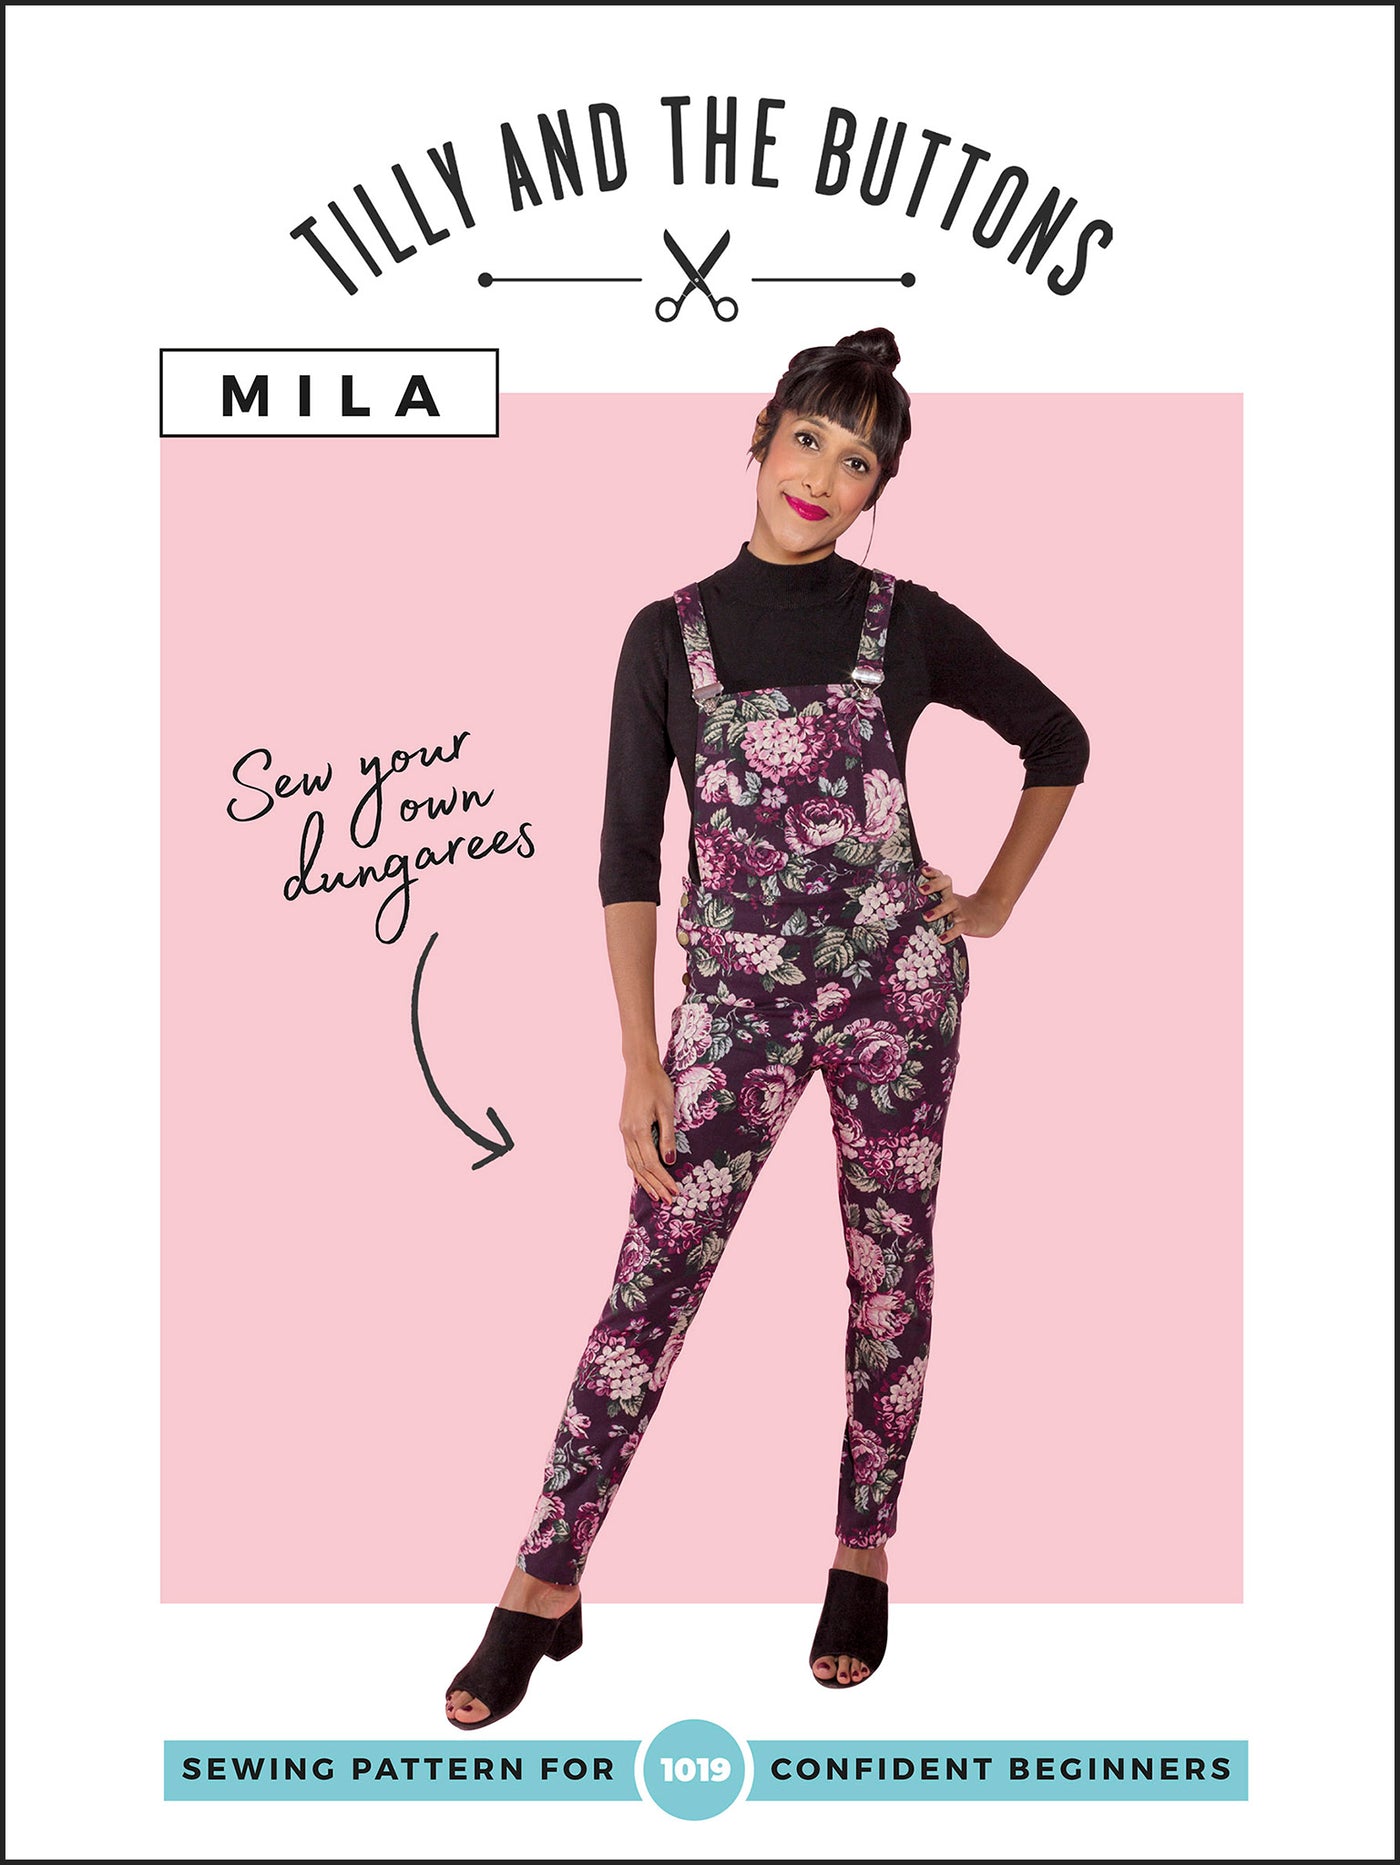 Tilly and the Buttons Mila Dungarees sewing pattern. Easy basic pattern.